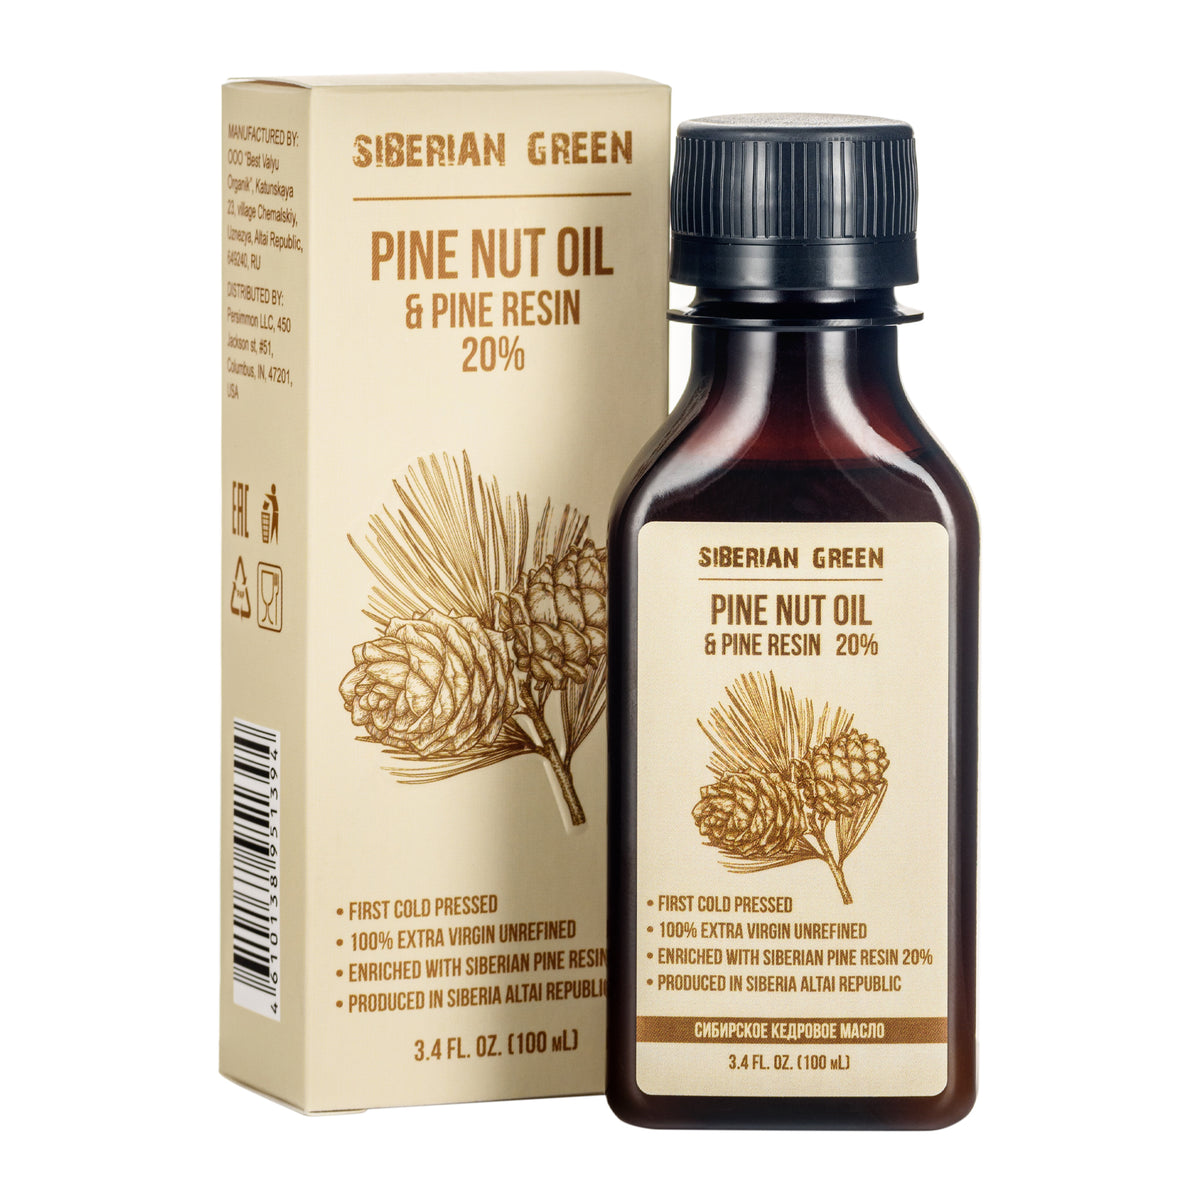 Siberian Pine Nut Oil with Pine Cedar Resin Pure Natural 100% Extra Virgin Cold Pressed 100 ml / 3.4 fl oz